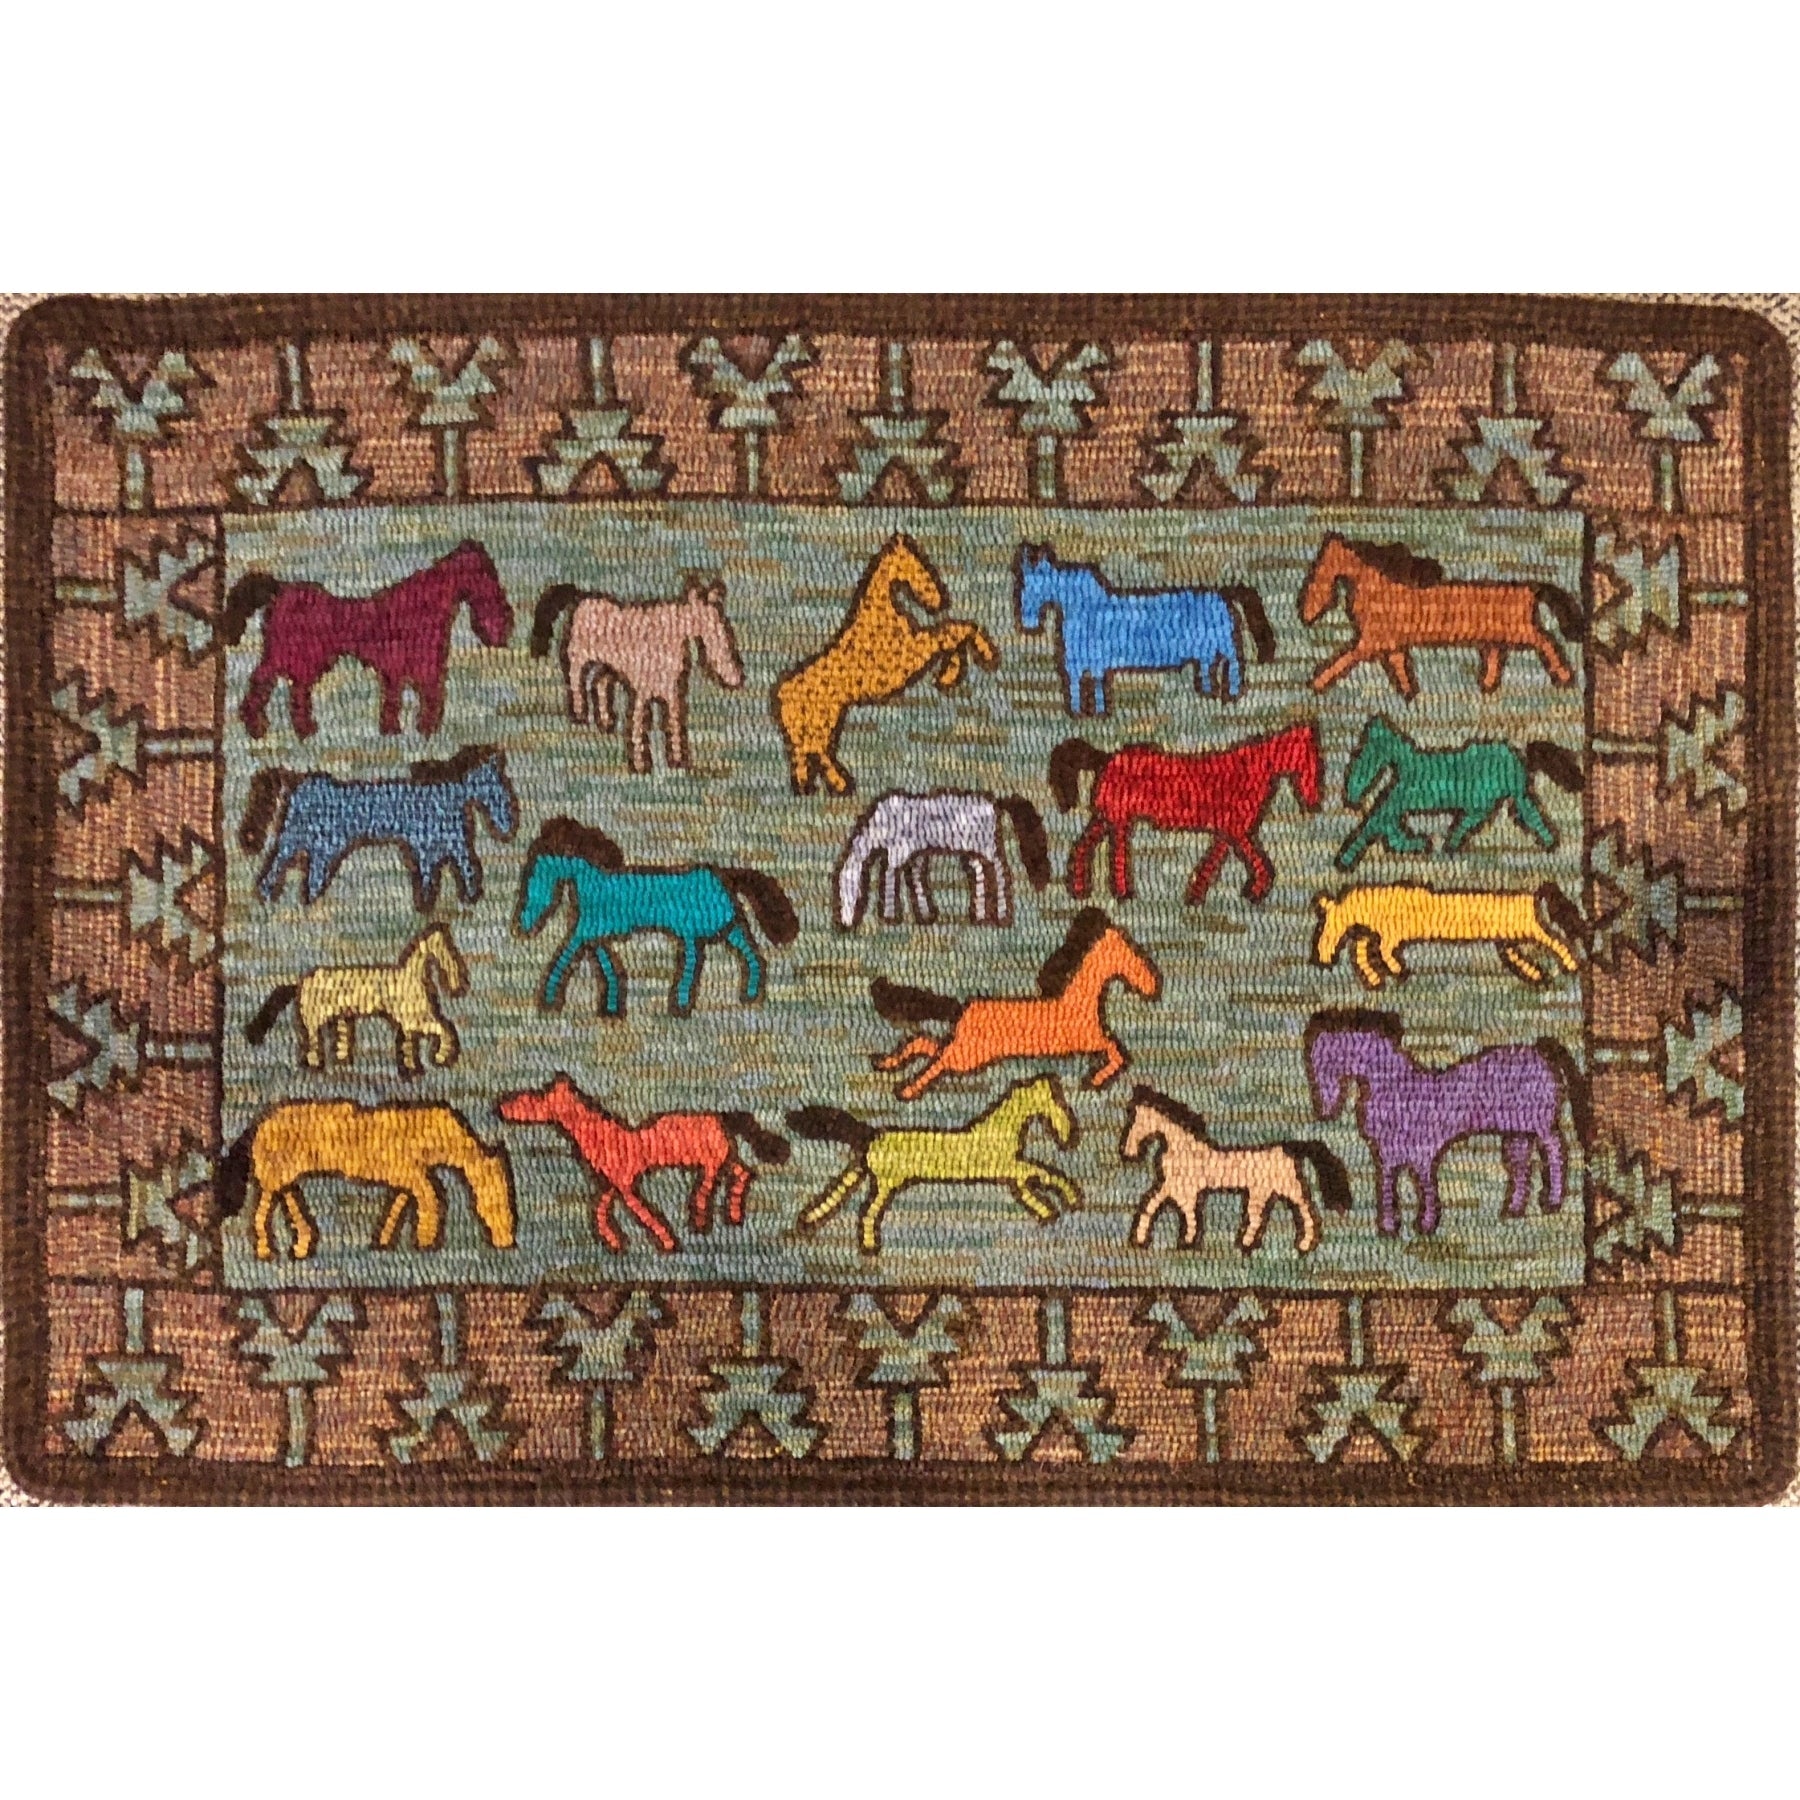 Azarie Horses, rug hooked by Amy McPheeters